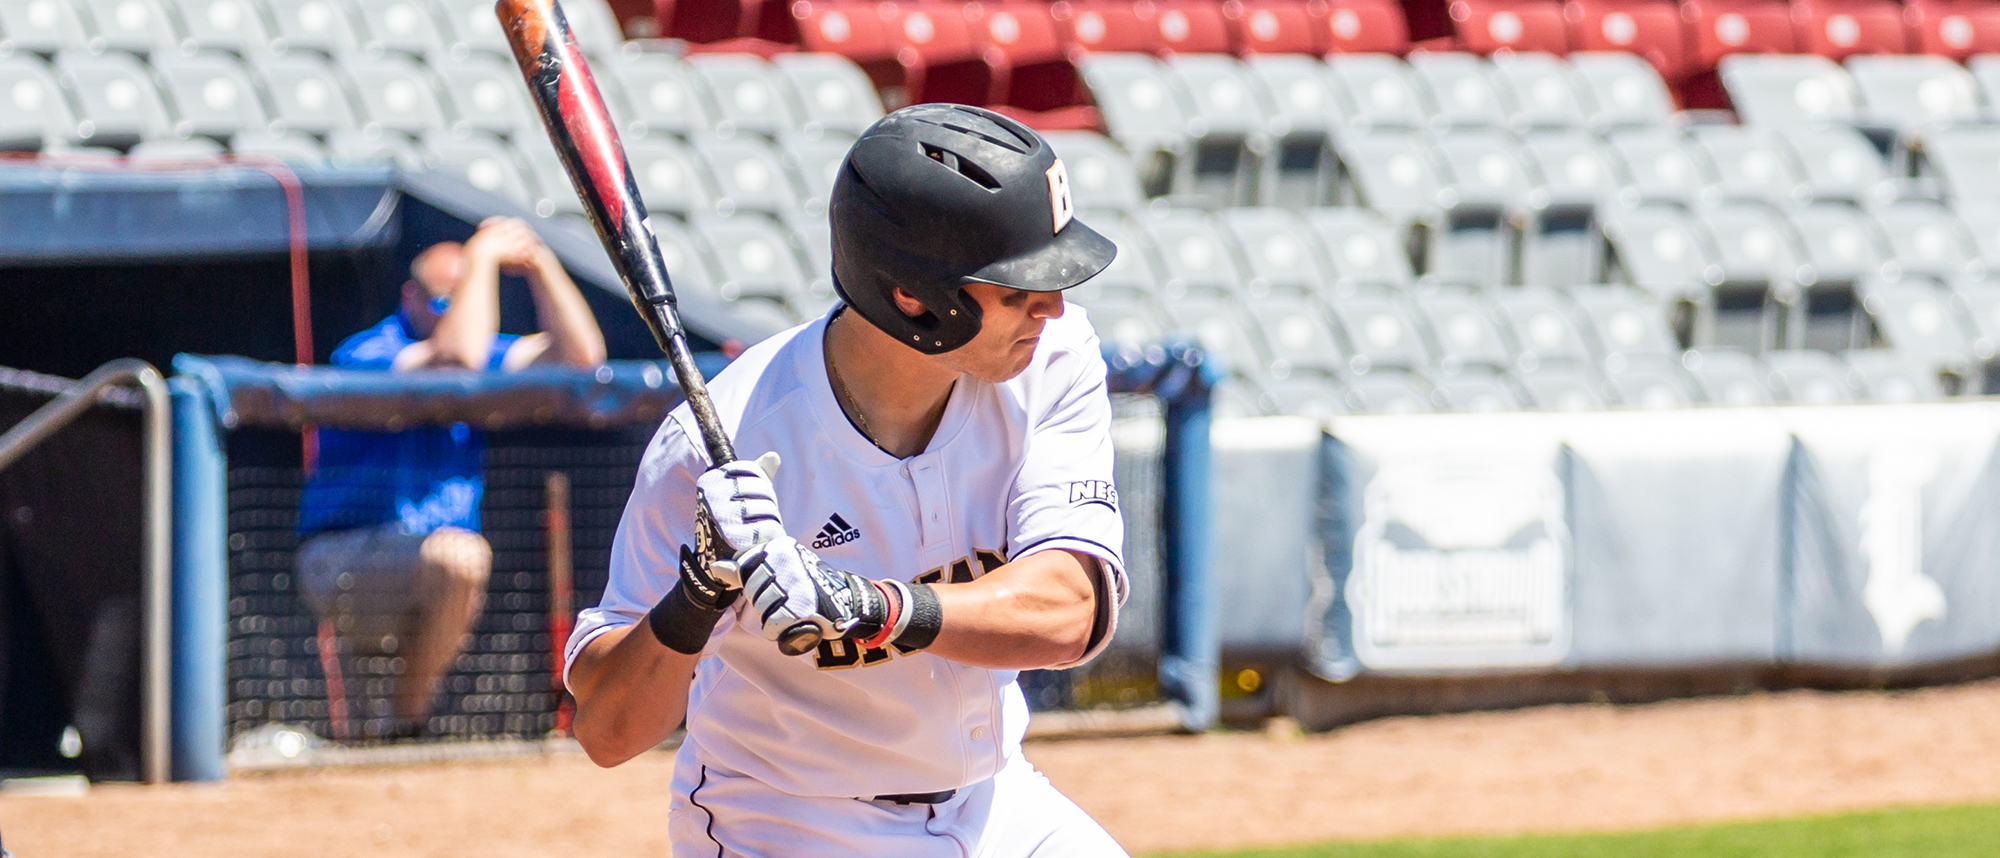 ACU tops Bryant with eighth-inning rally